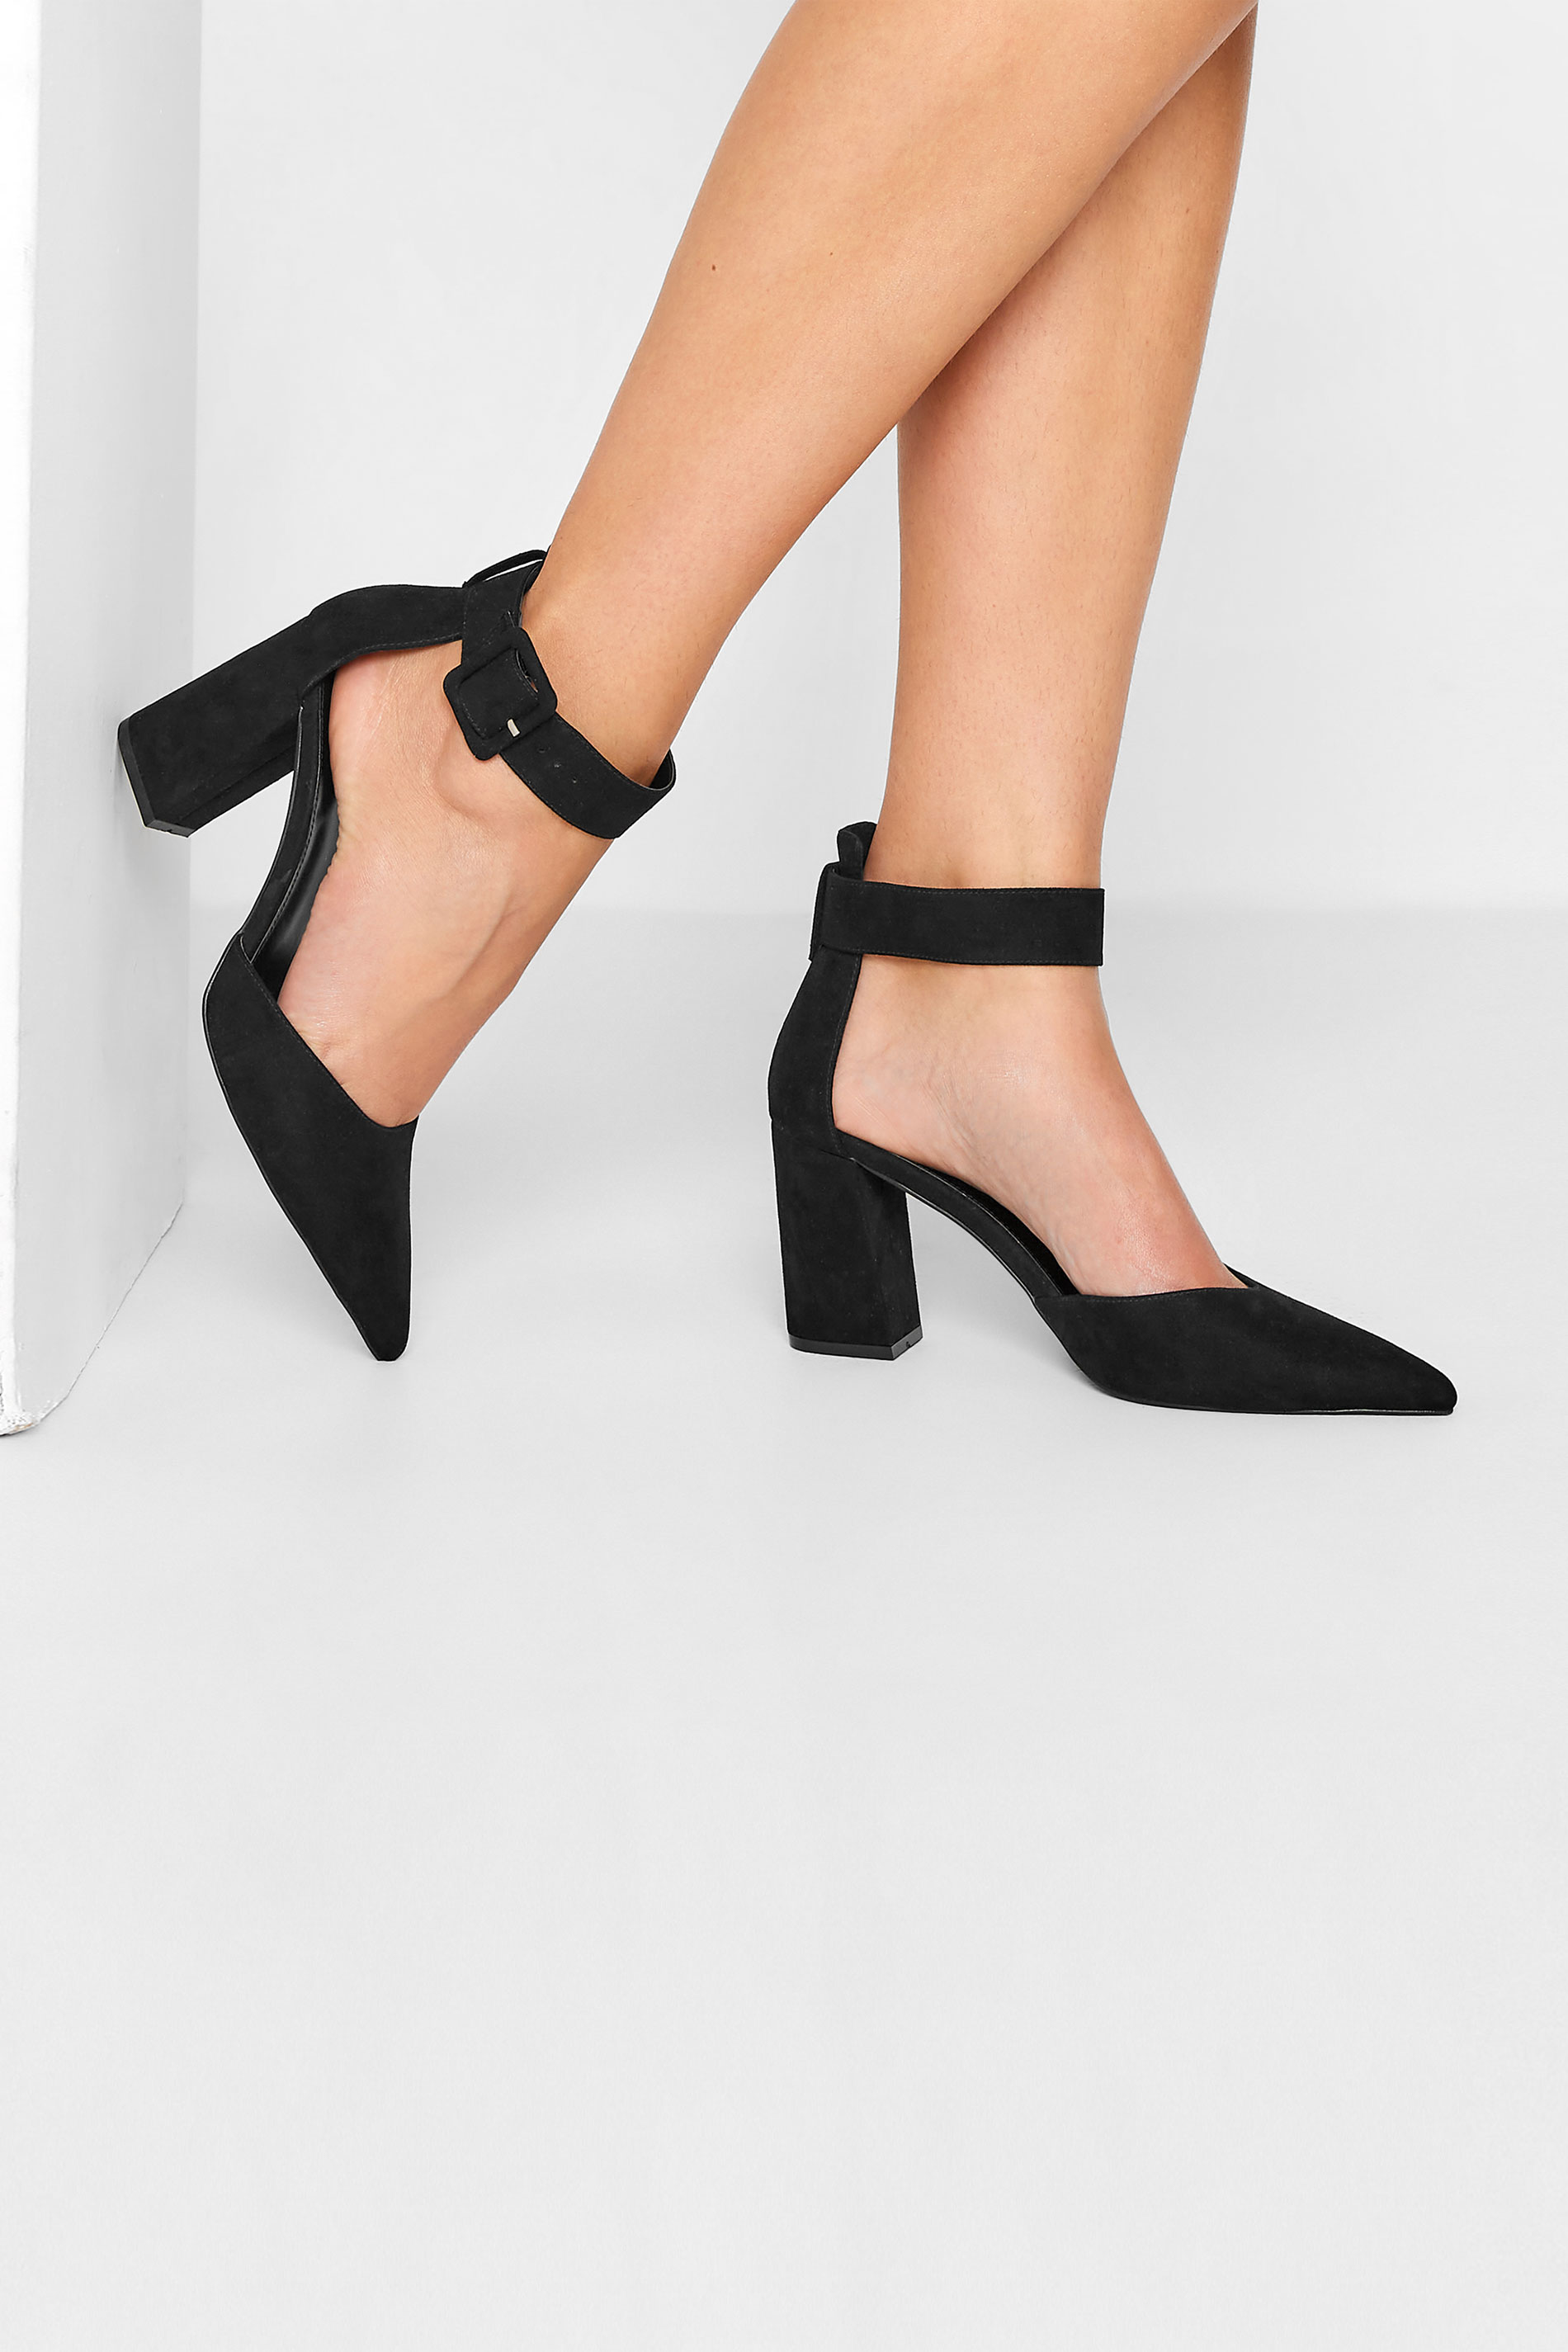 LTS Black Pointed Block Heel Court Shoes In Standard D Fit | Long Tall Sally 1